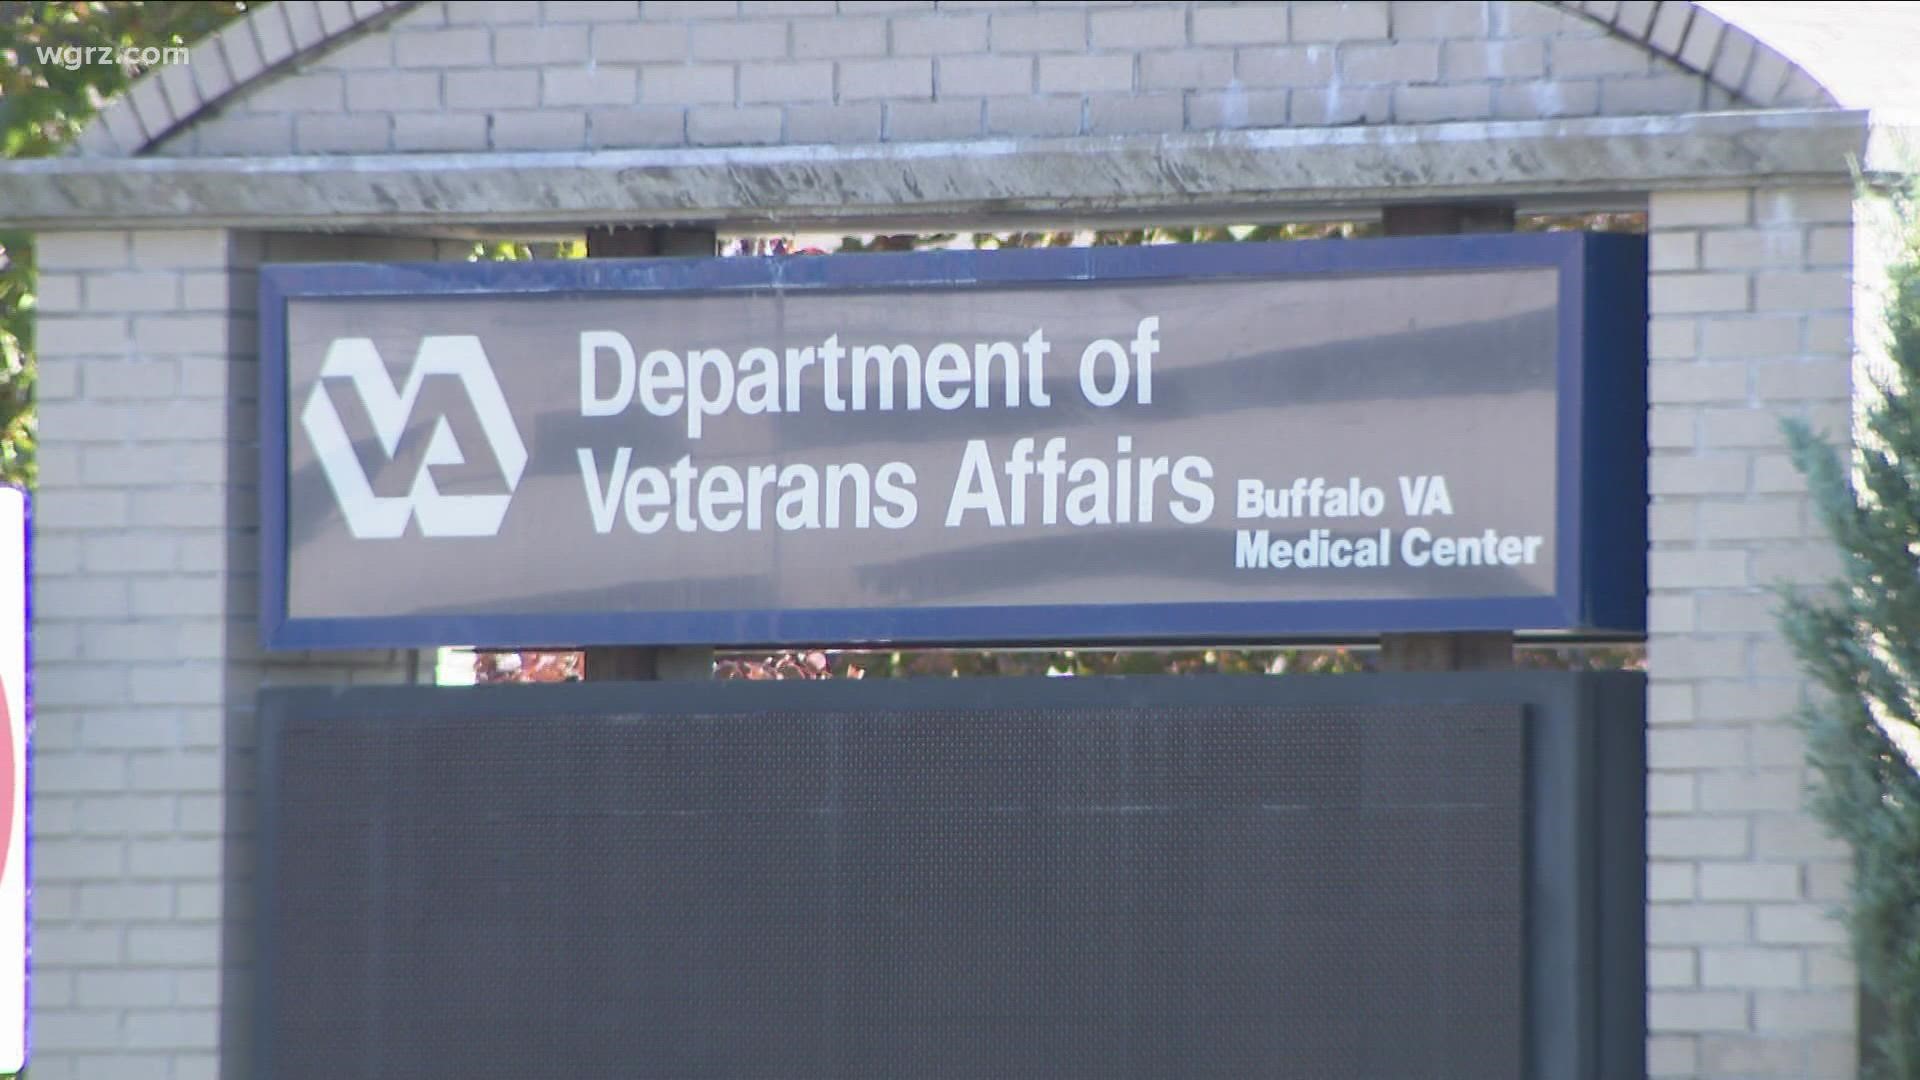 Western New York's VA notified employees that in July the process would begin for vaccine mandates, and some people are speaking out.